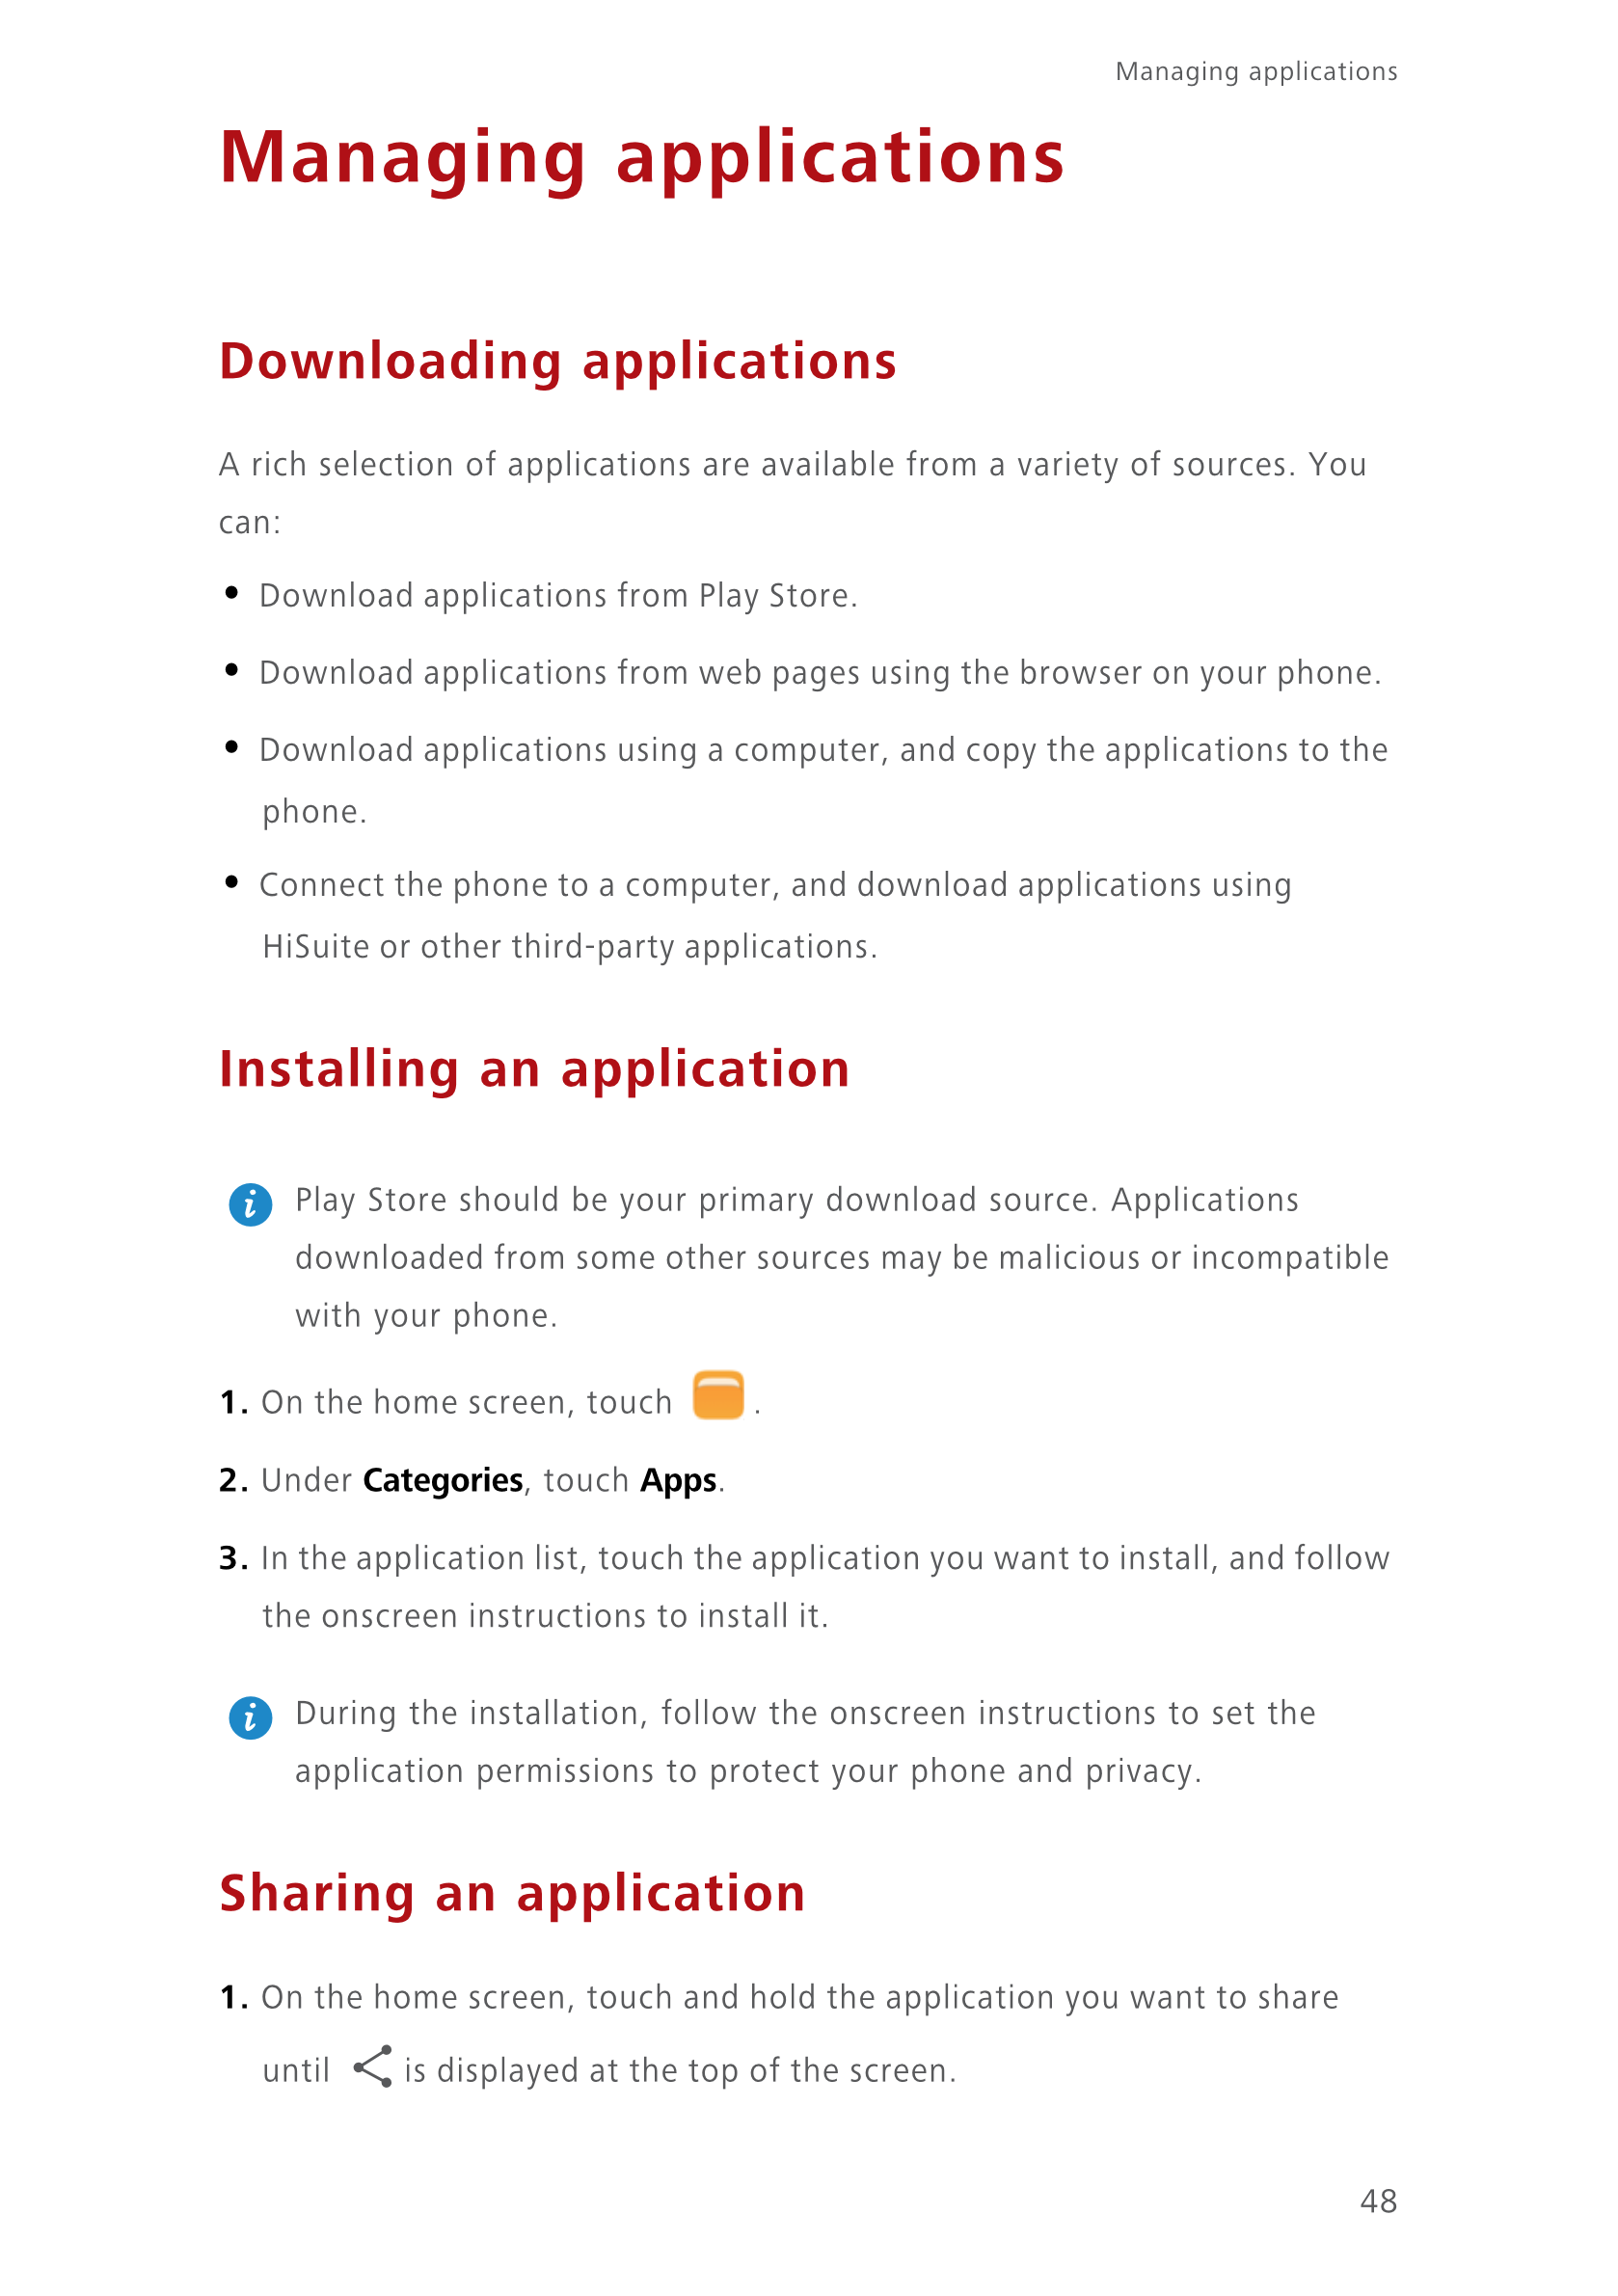 Managing applications 
Managing applications
Downloading applications
A rich selection of applications are available from a vari